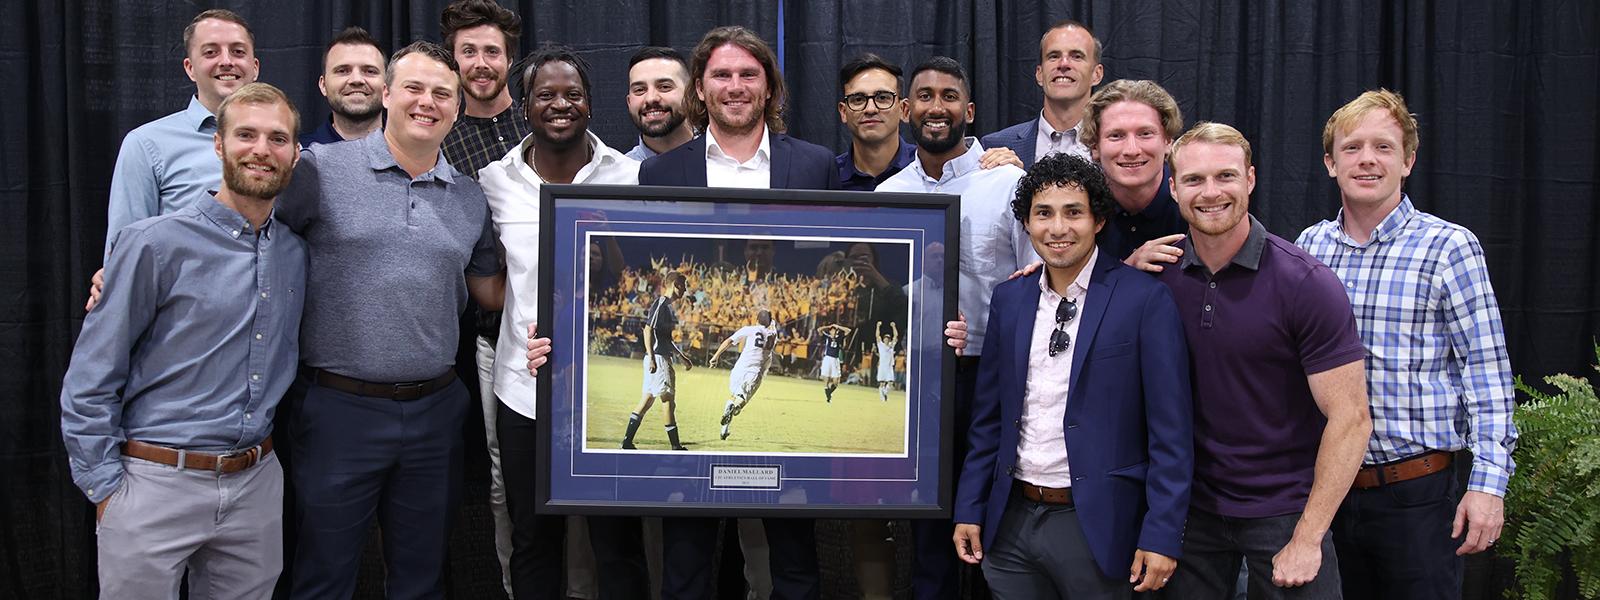 Daniel Mallard displays his Hall of Fame award with members of the 2012 men's soccer team. The photo shows Mallard celebrating after scoring the first goal in CIU history.)